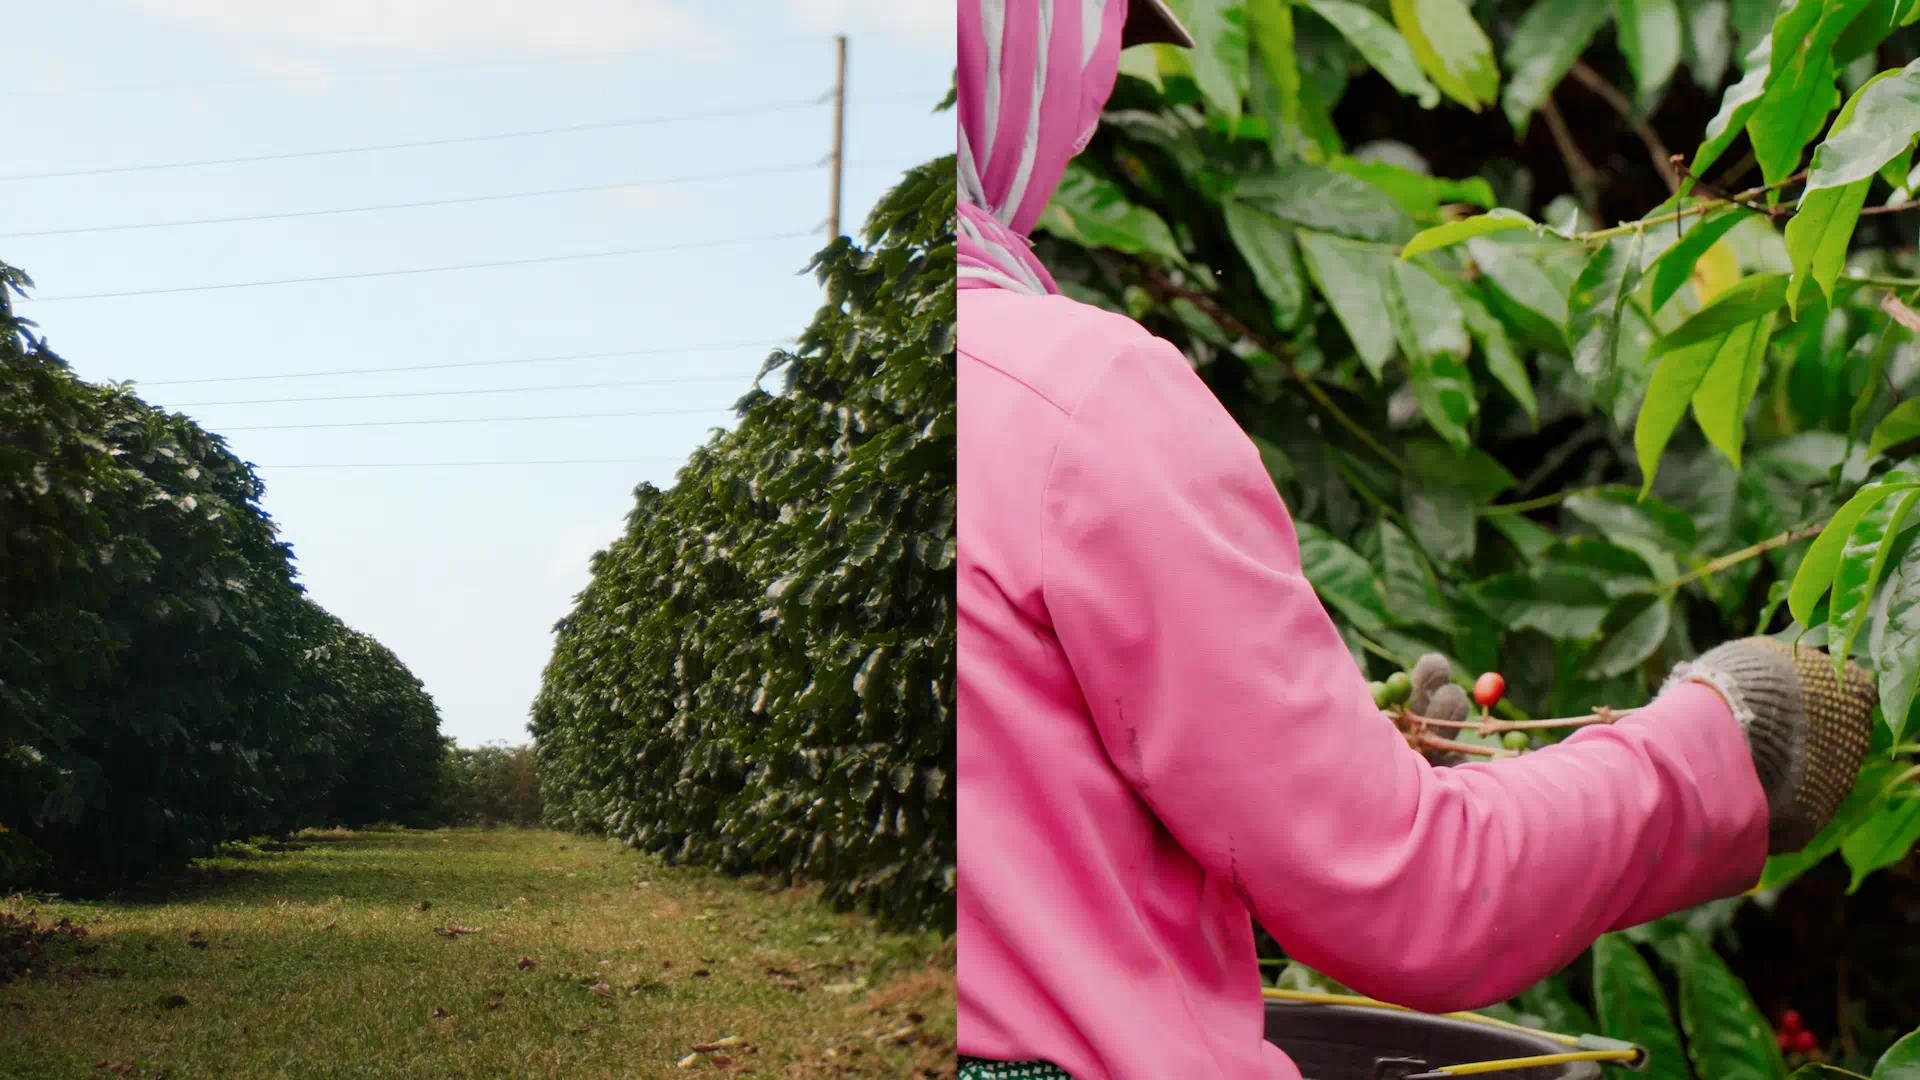 The image on the left side has two rows of trees with grass down the middle. The image on the right is the shoulder and arm of a farm worker pulling product from a tree.